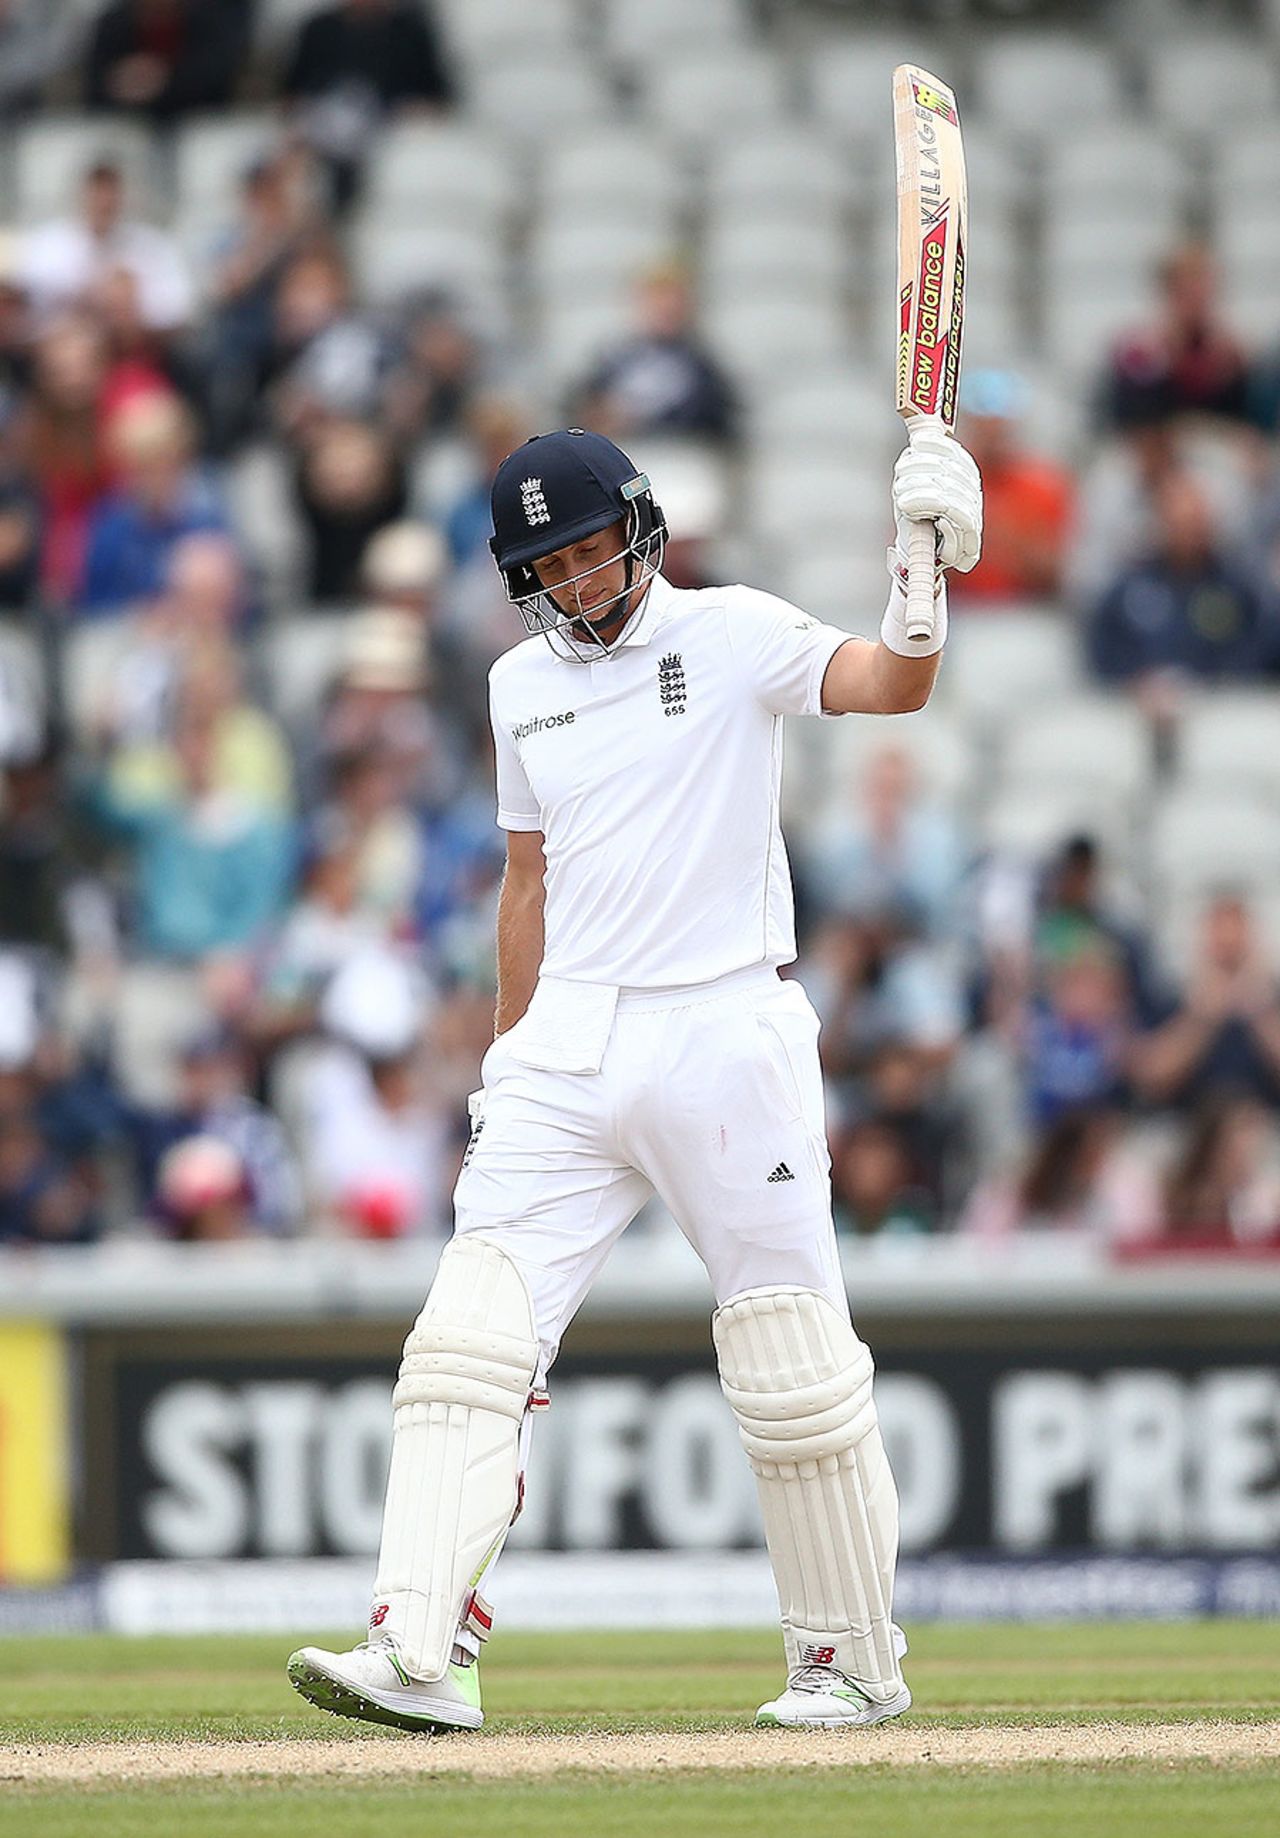 Joe Root acknowledges the crowd after reaching his fifty in 38 balls, England v Pakistan, 2nd Investec Test, Old Trafford, 4th day, July 25, 2016